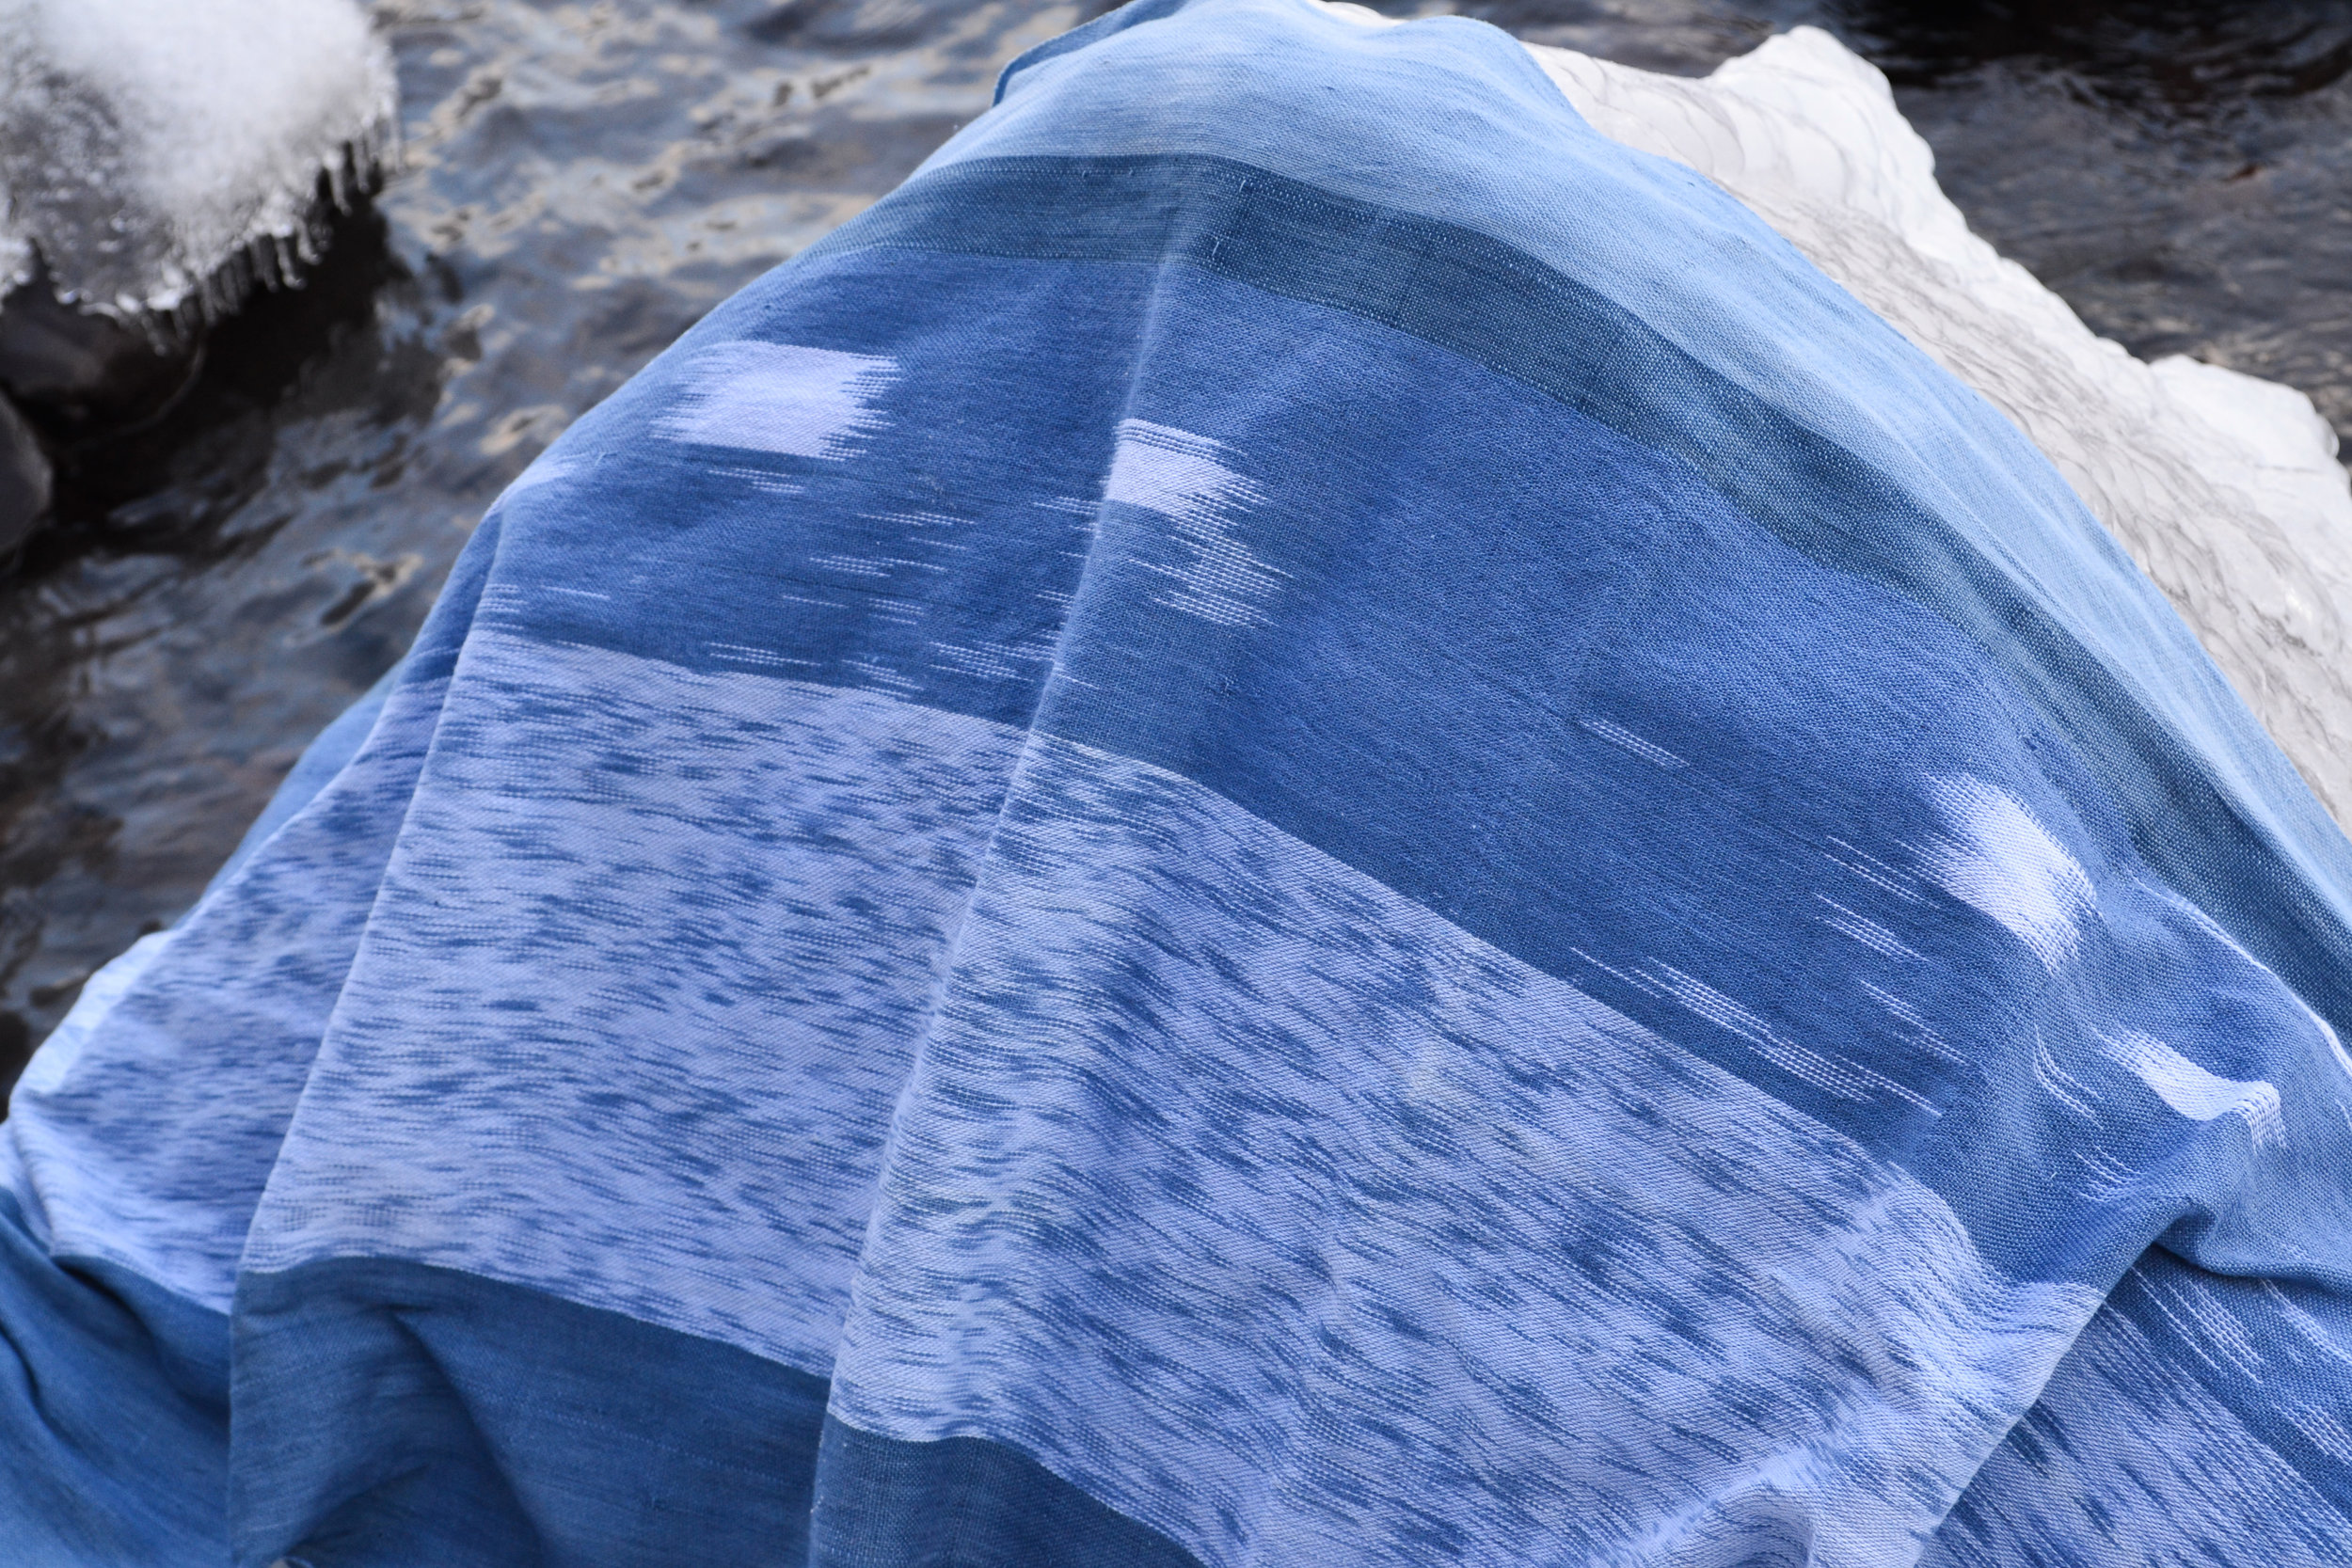   Banner-Scape No. 1: Lake Michigan, IL . Hand-woven, indigo dyed cloth with an ikat resist, 2012. 